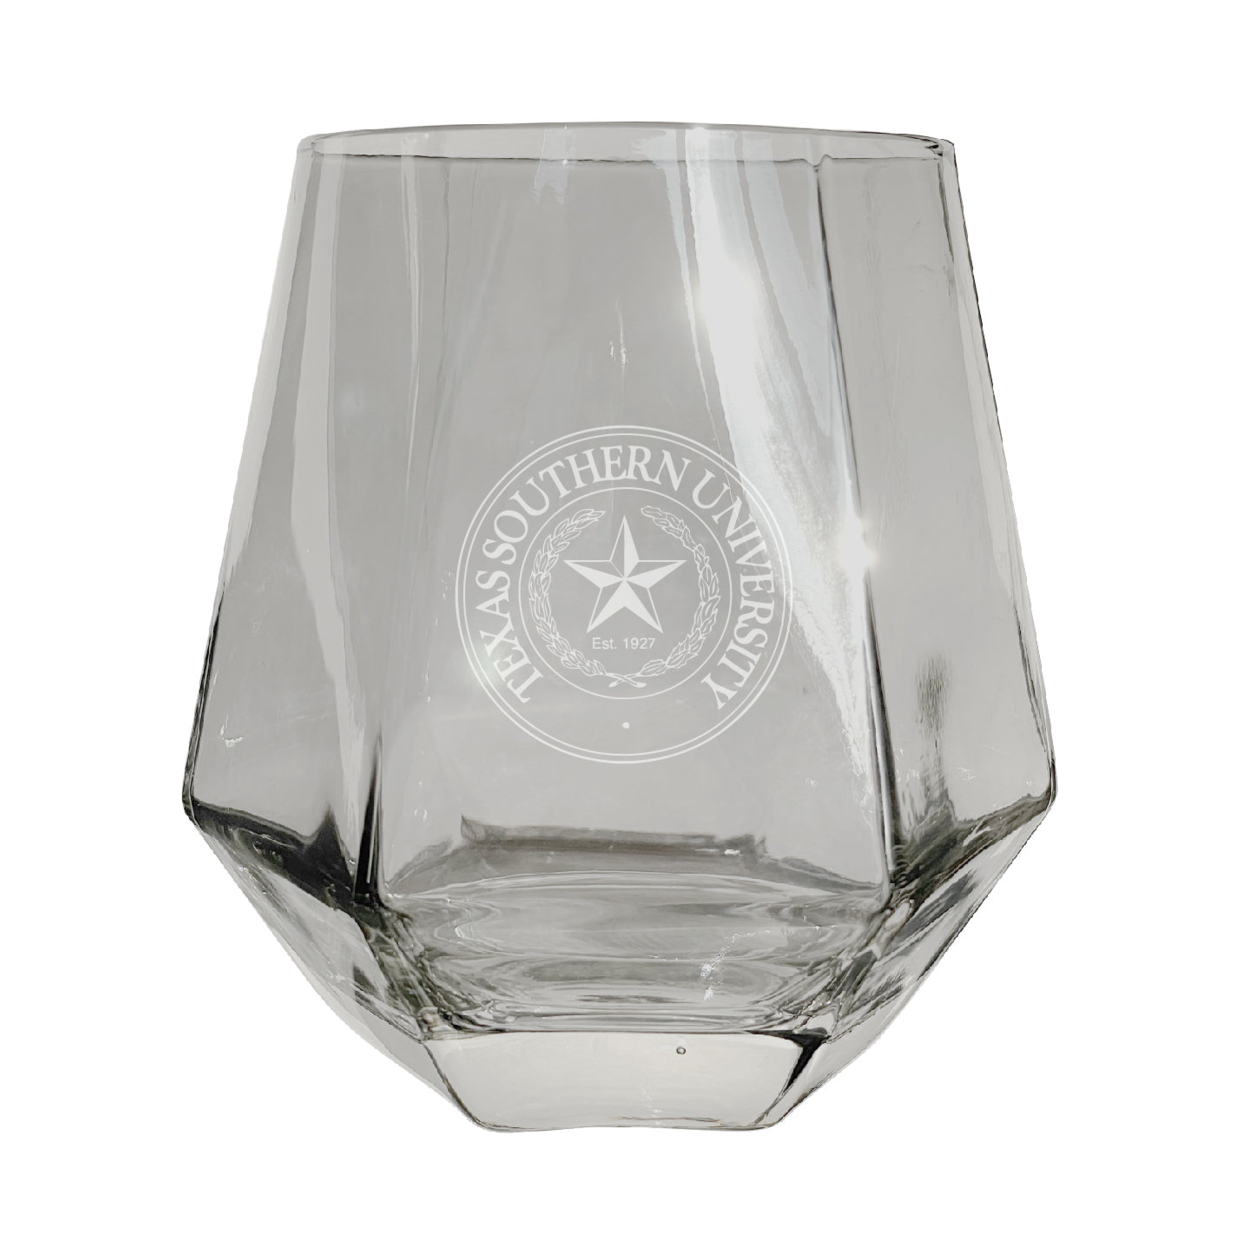 Texas Southern University Etched Diamond Cut Stemless 10 Ounce Wine Glass Clear